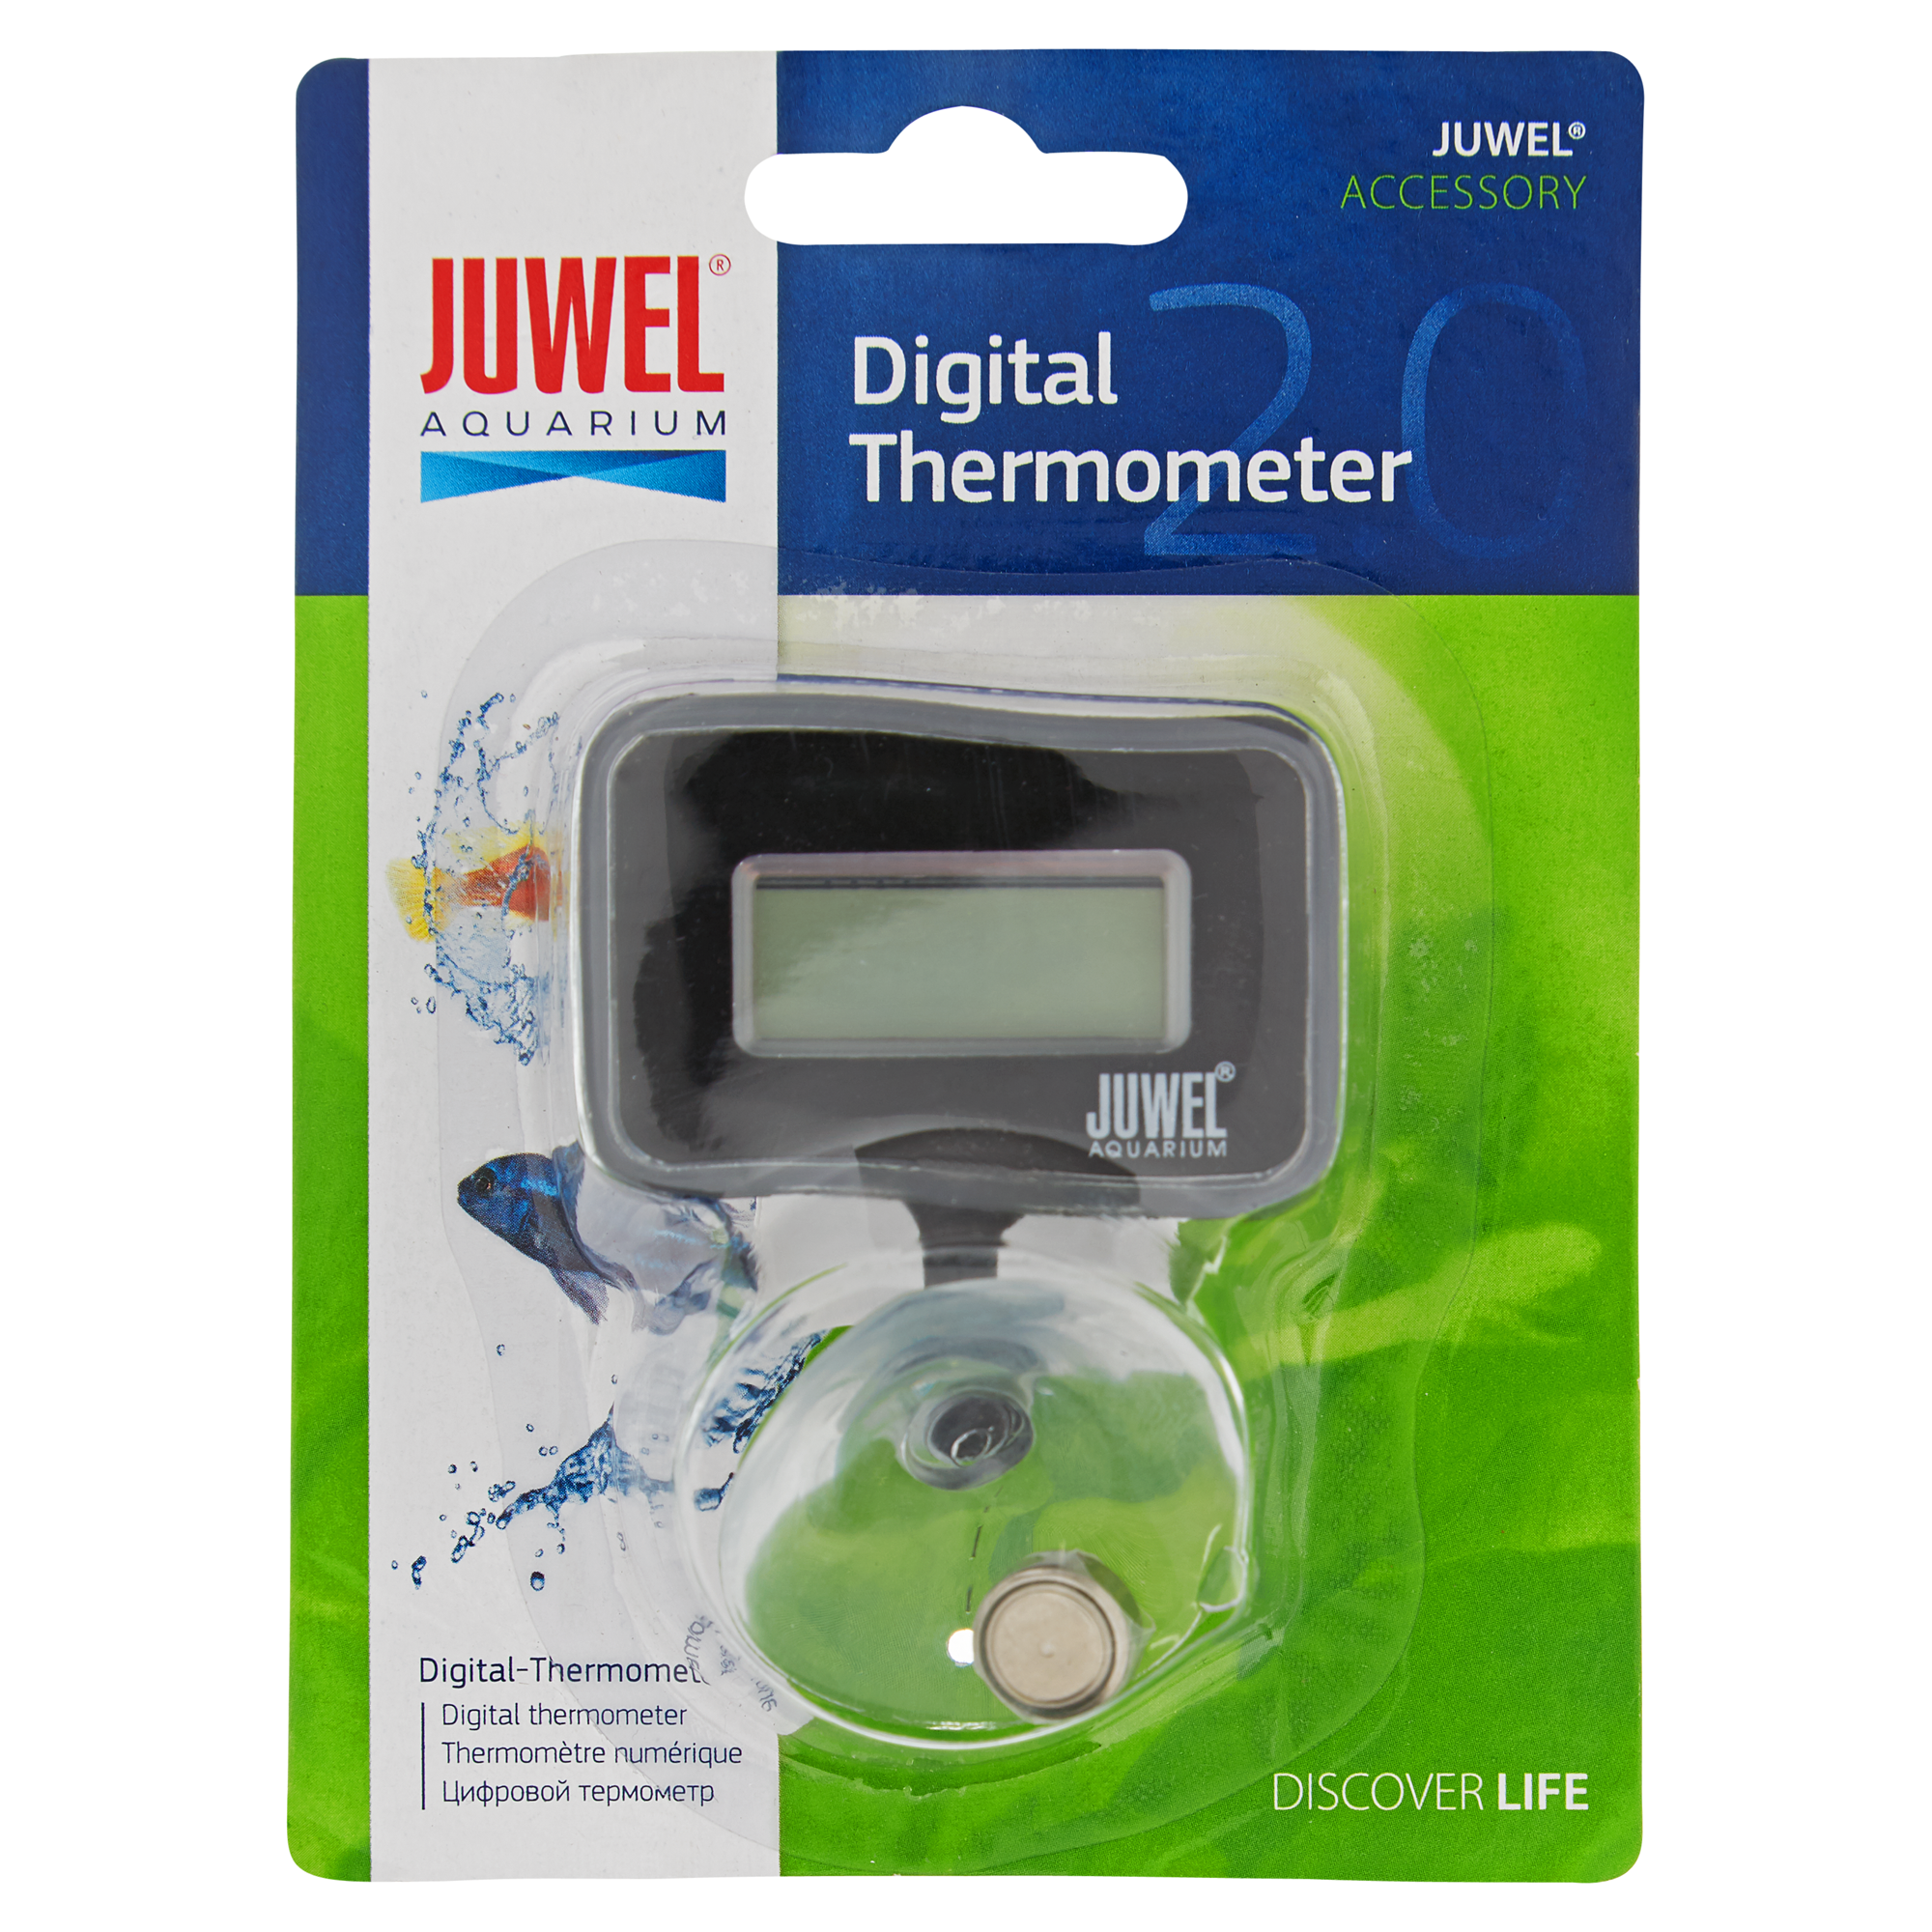 Digital-Thermometer + product picture